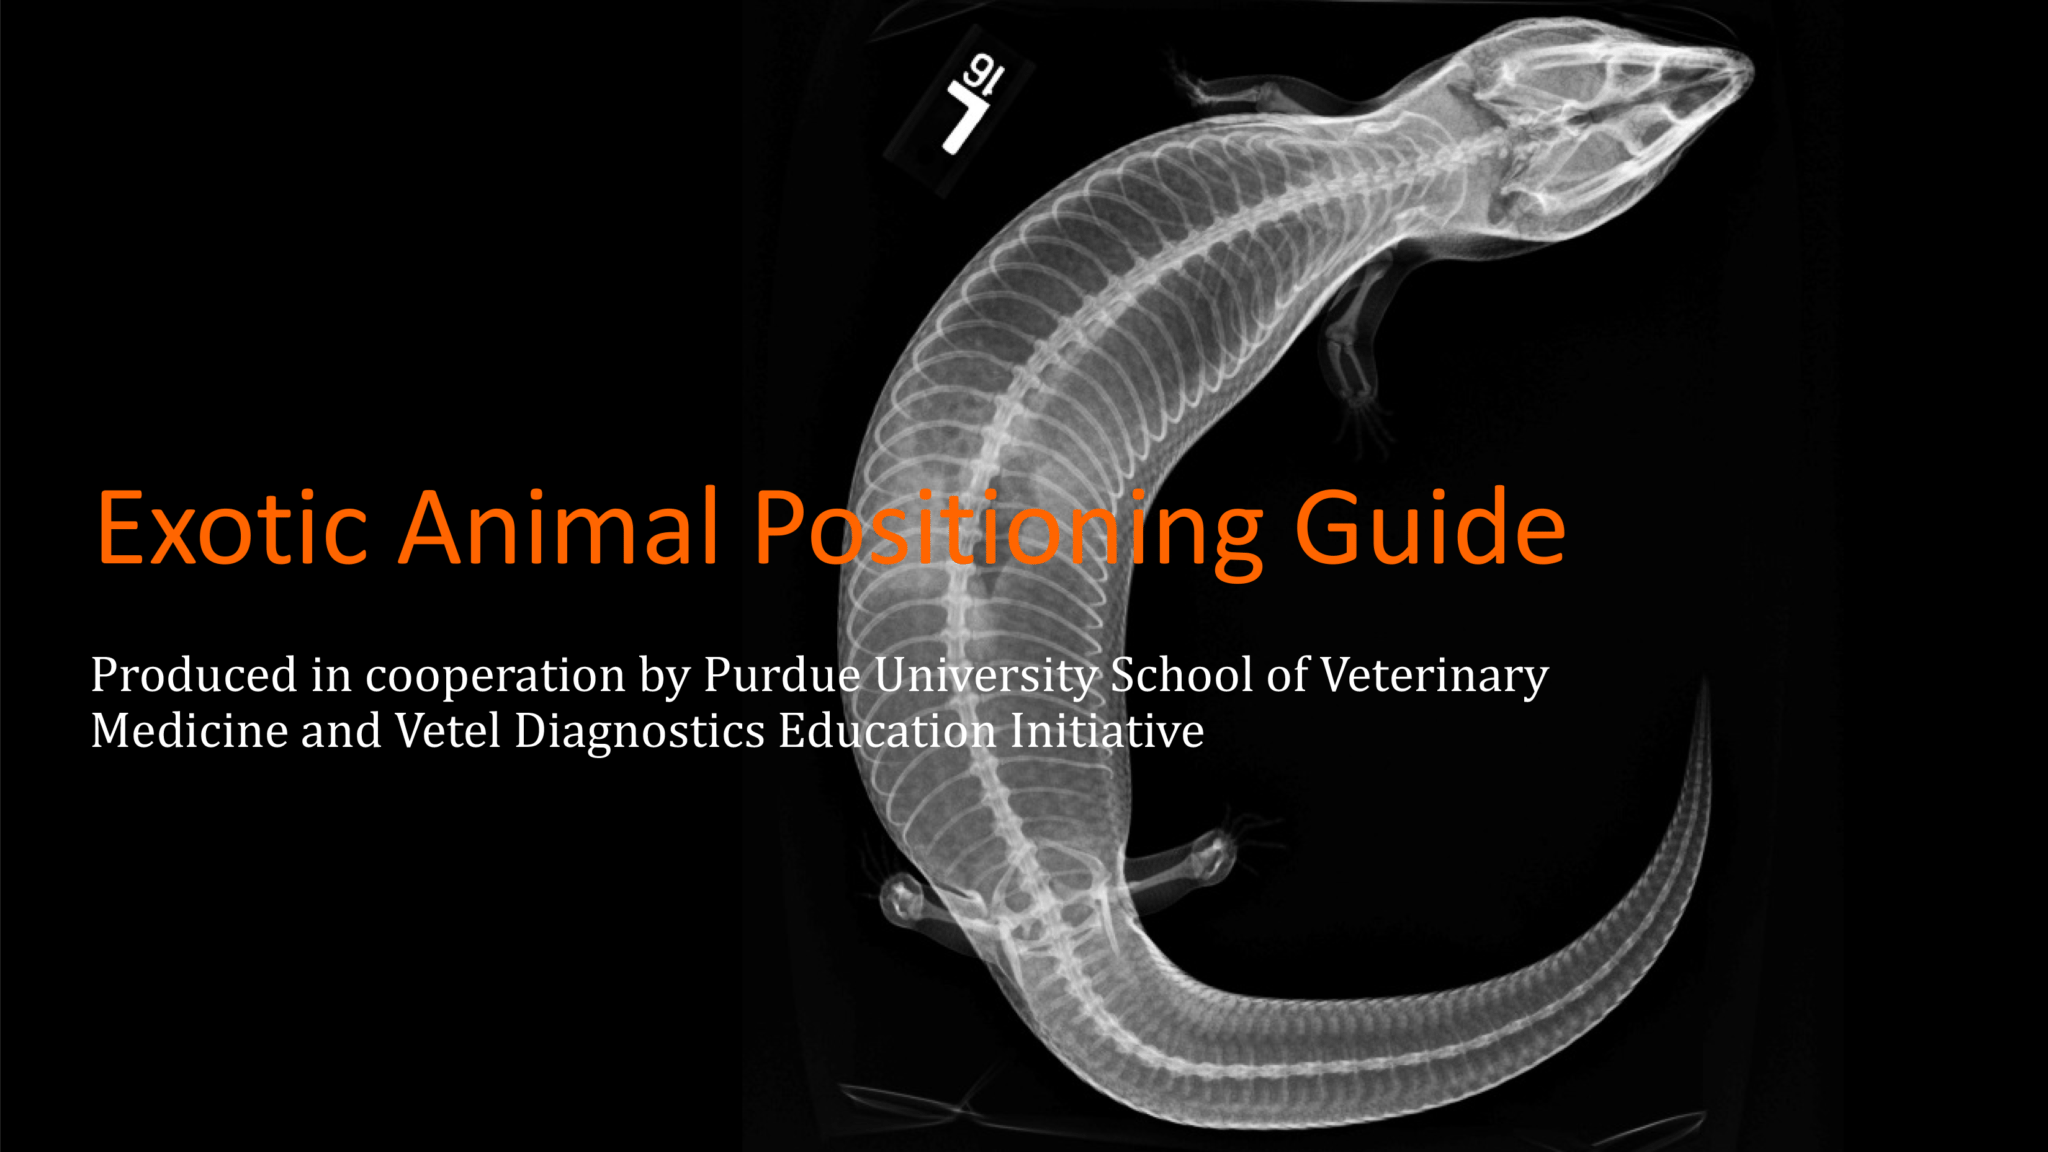 Exotic Animal Radiographic Positioning Guide ebook – VUE IMAGING